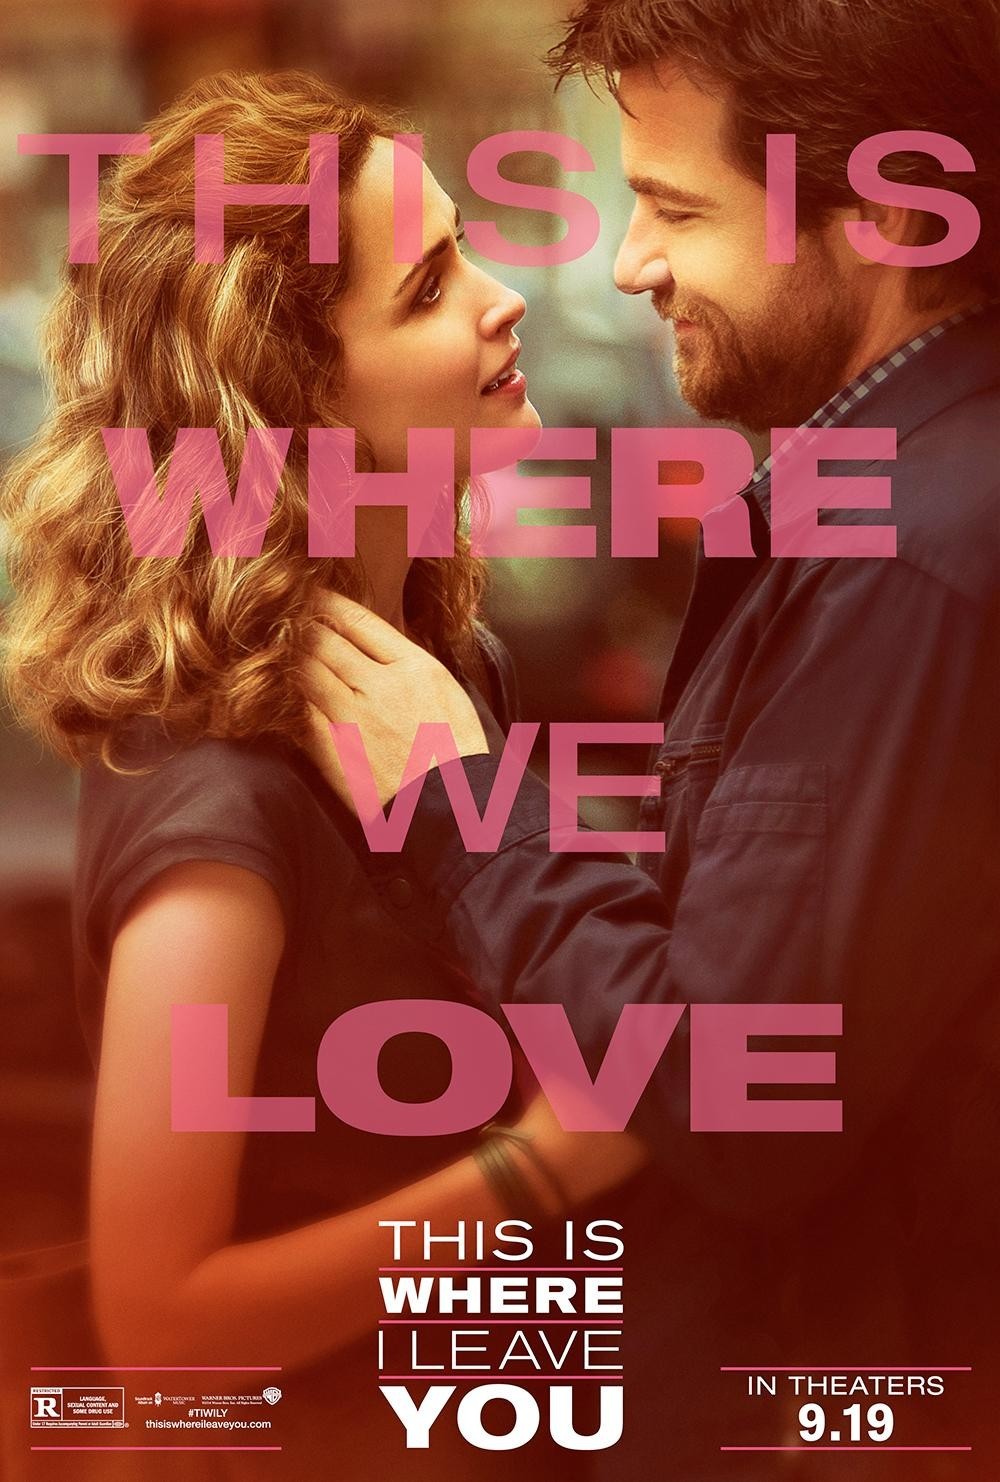 Poster of Warner Bros. Pictures' This Is Where I Leave You (2014)